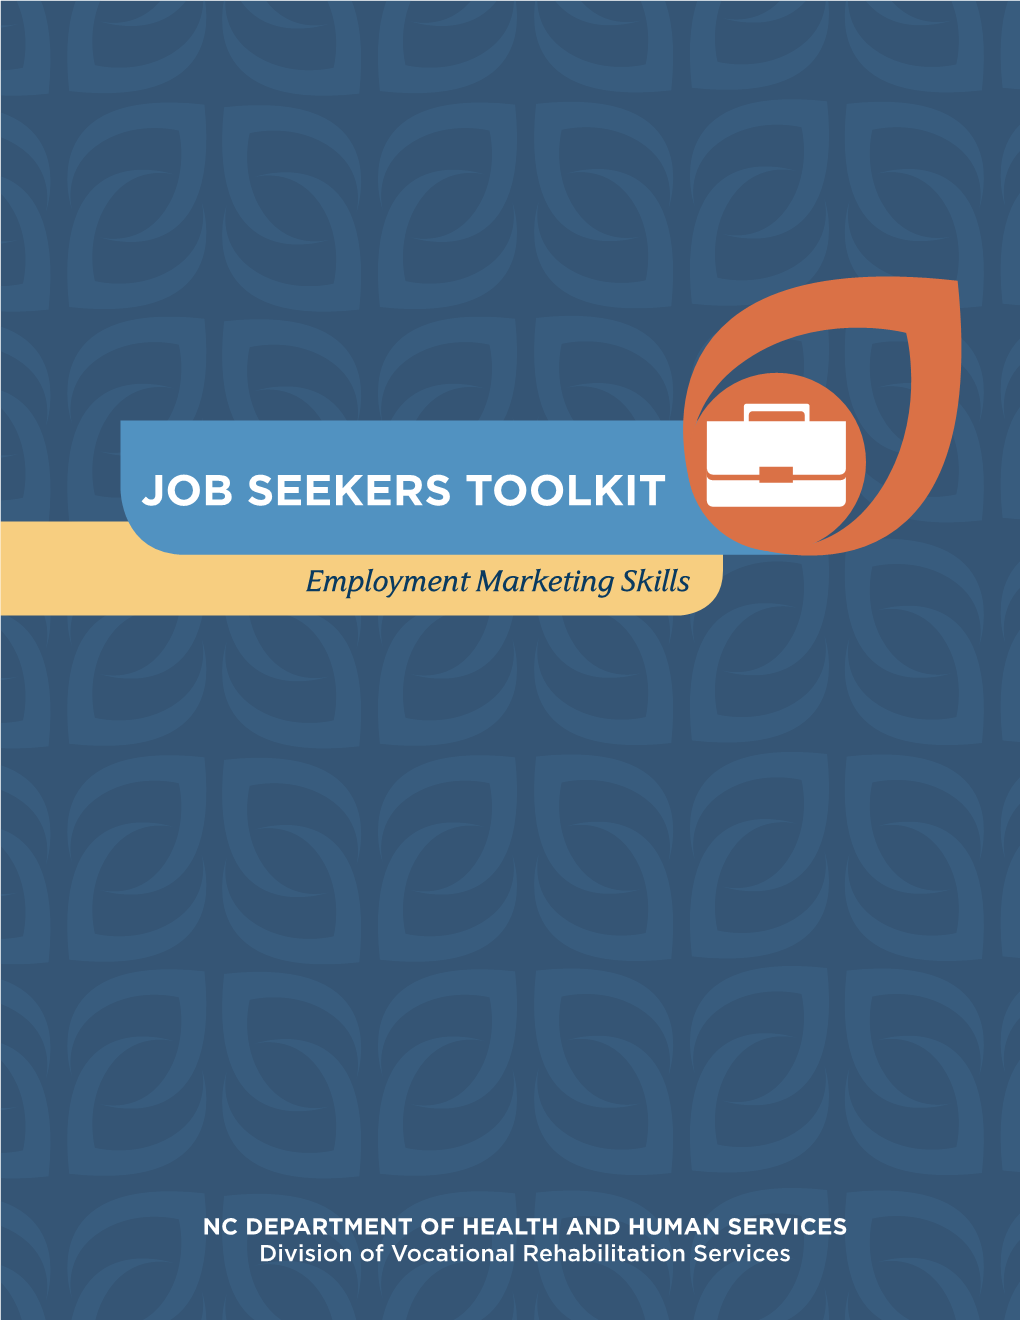 NC Department of Health and Human Services: Job Seekers Toolkit